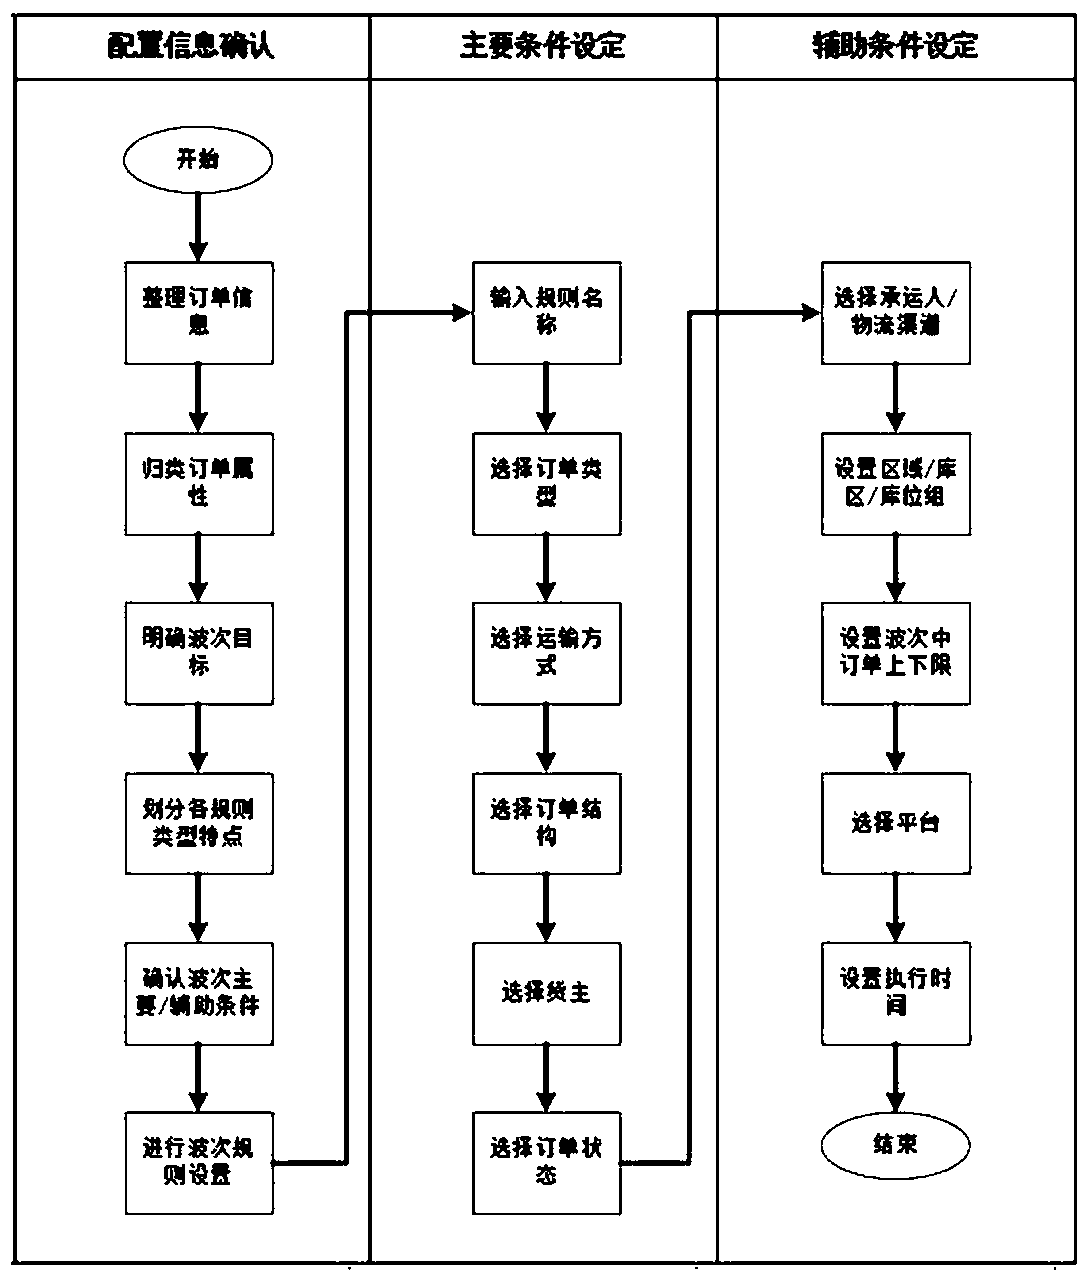 A wave order processing method and system